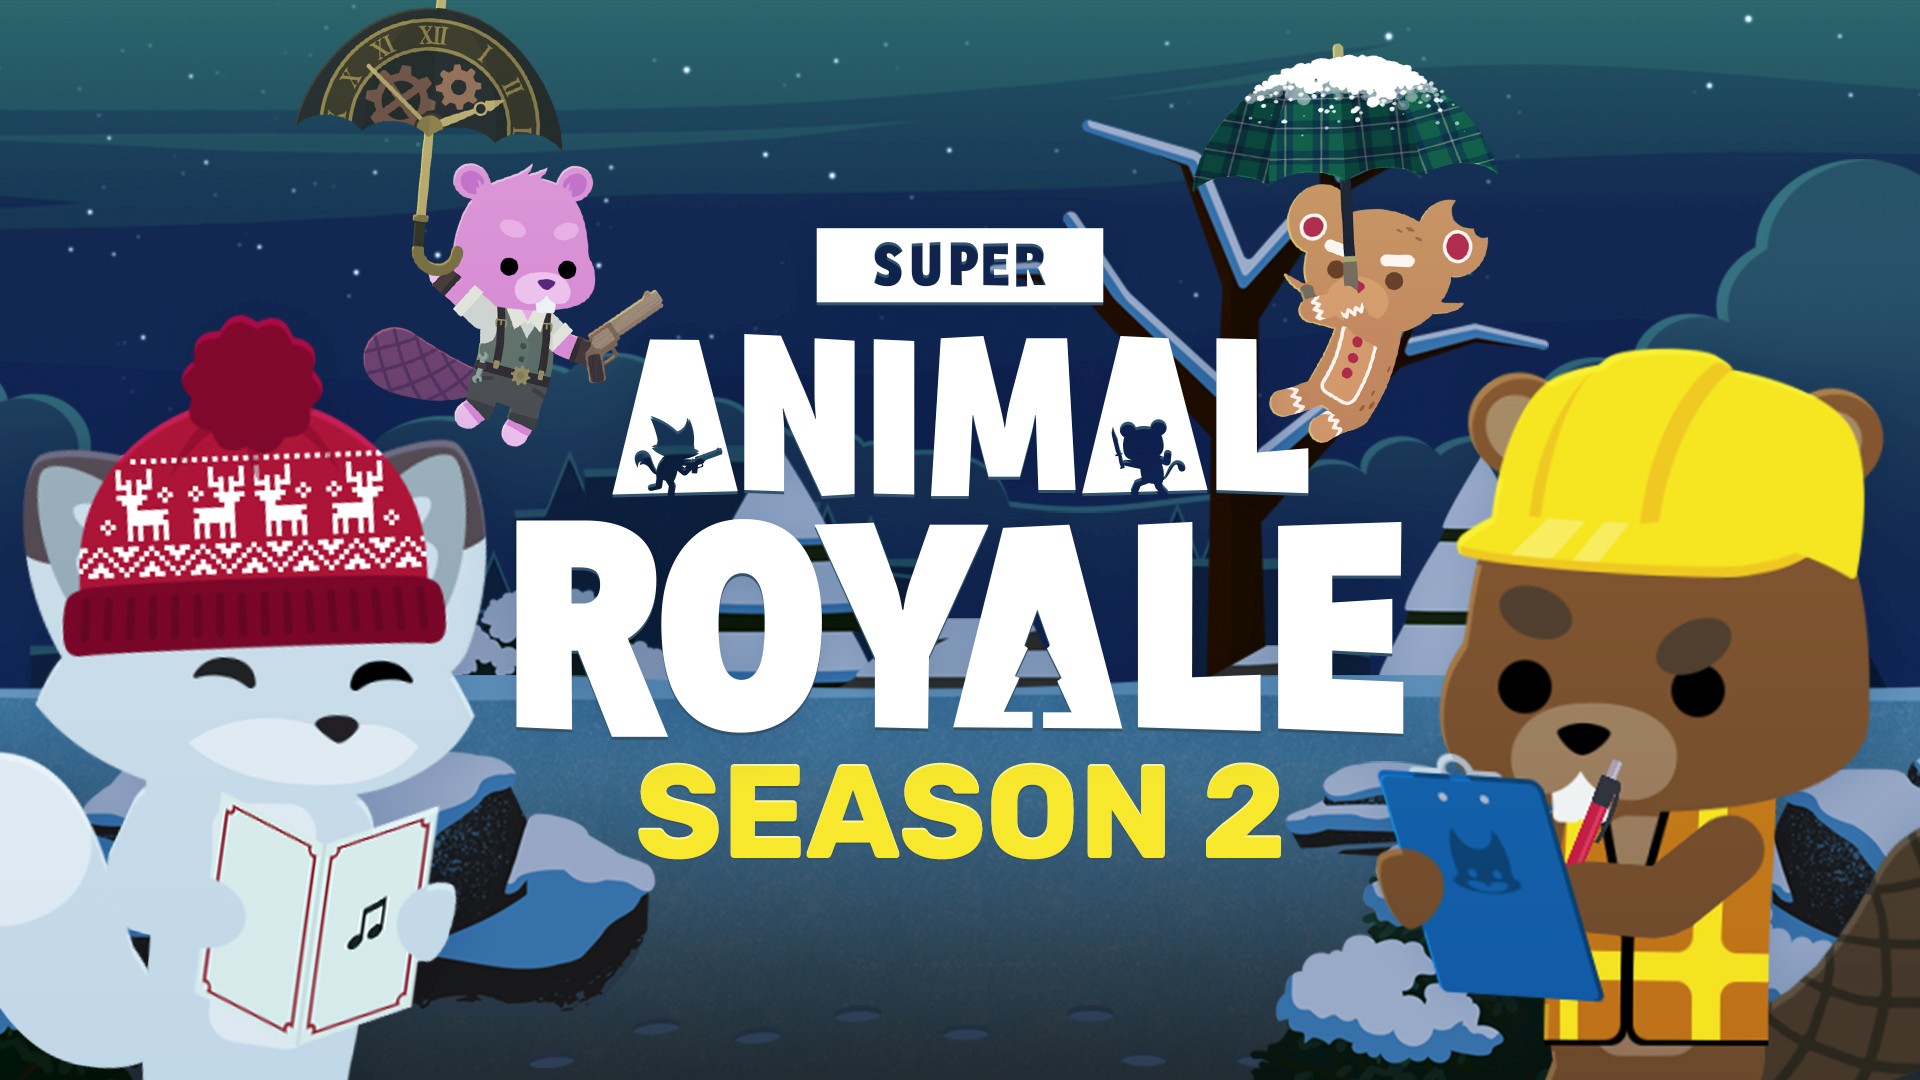 Video For Get Your Exclusive Look at Super Animal Royale’s “Busy Busy” Season 2